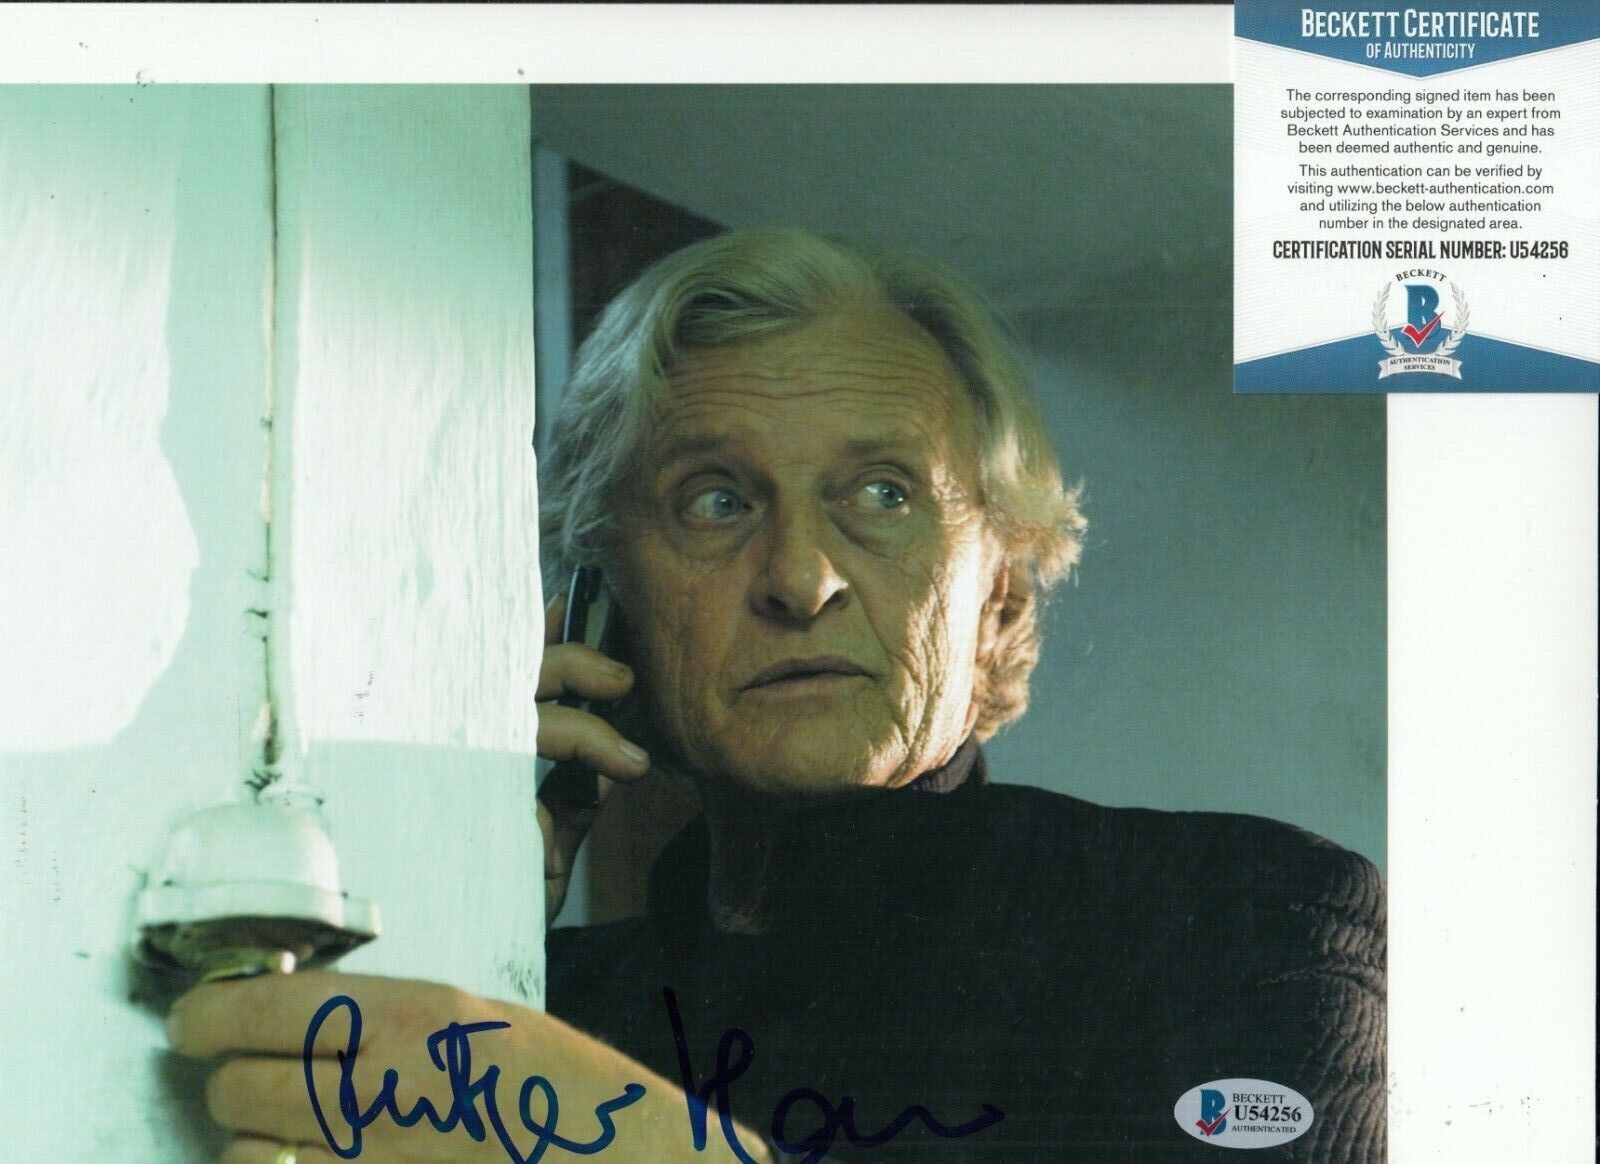 RUTGER HAUER signed (THE HITCHER) Movie 8X10 Photo Poster painting *PROOF* BECKETT BAS U54256